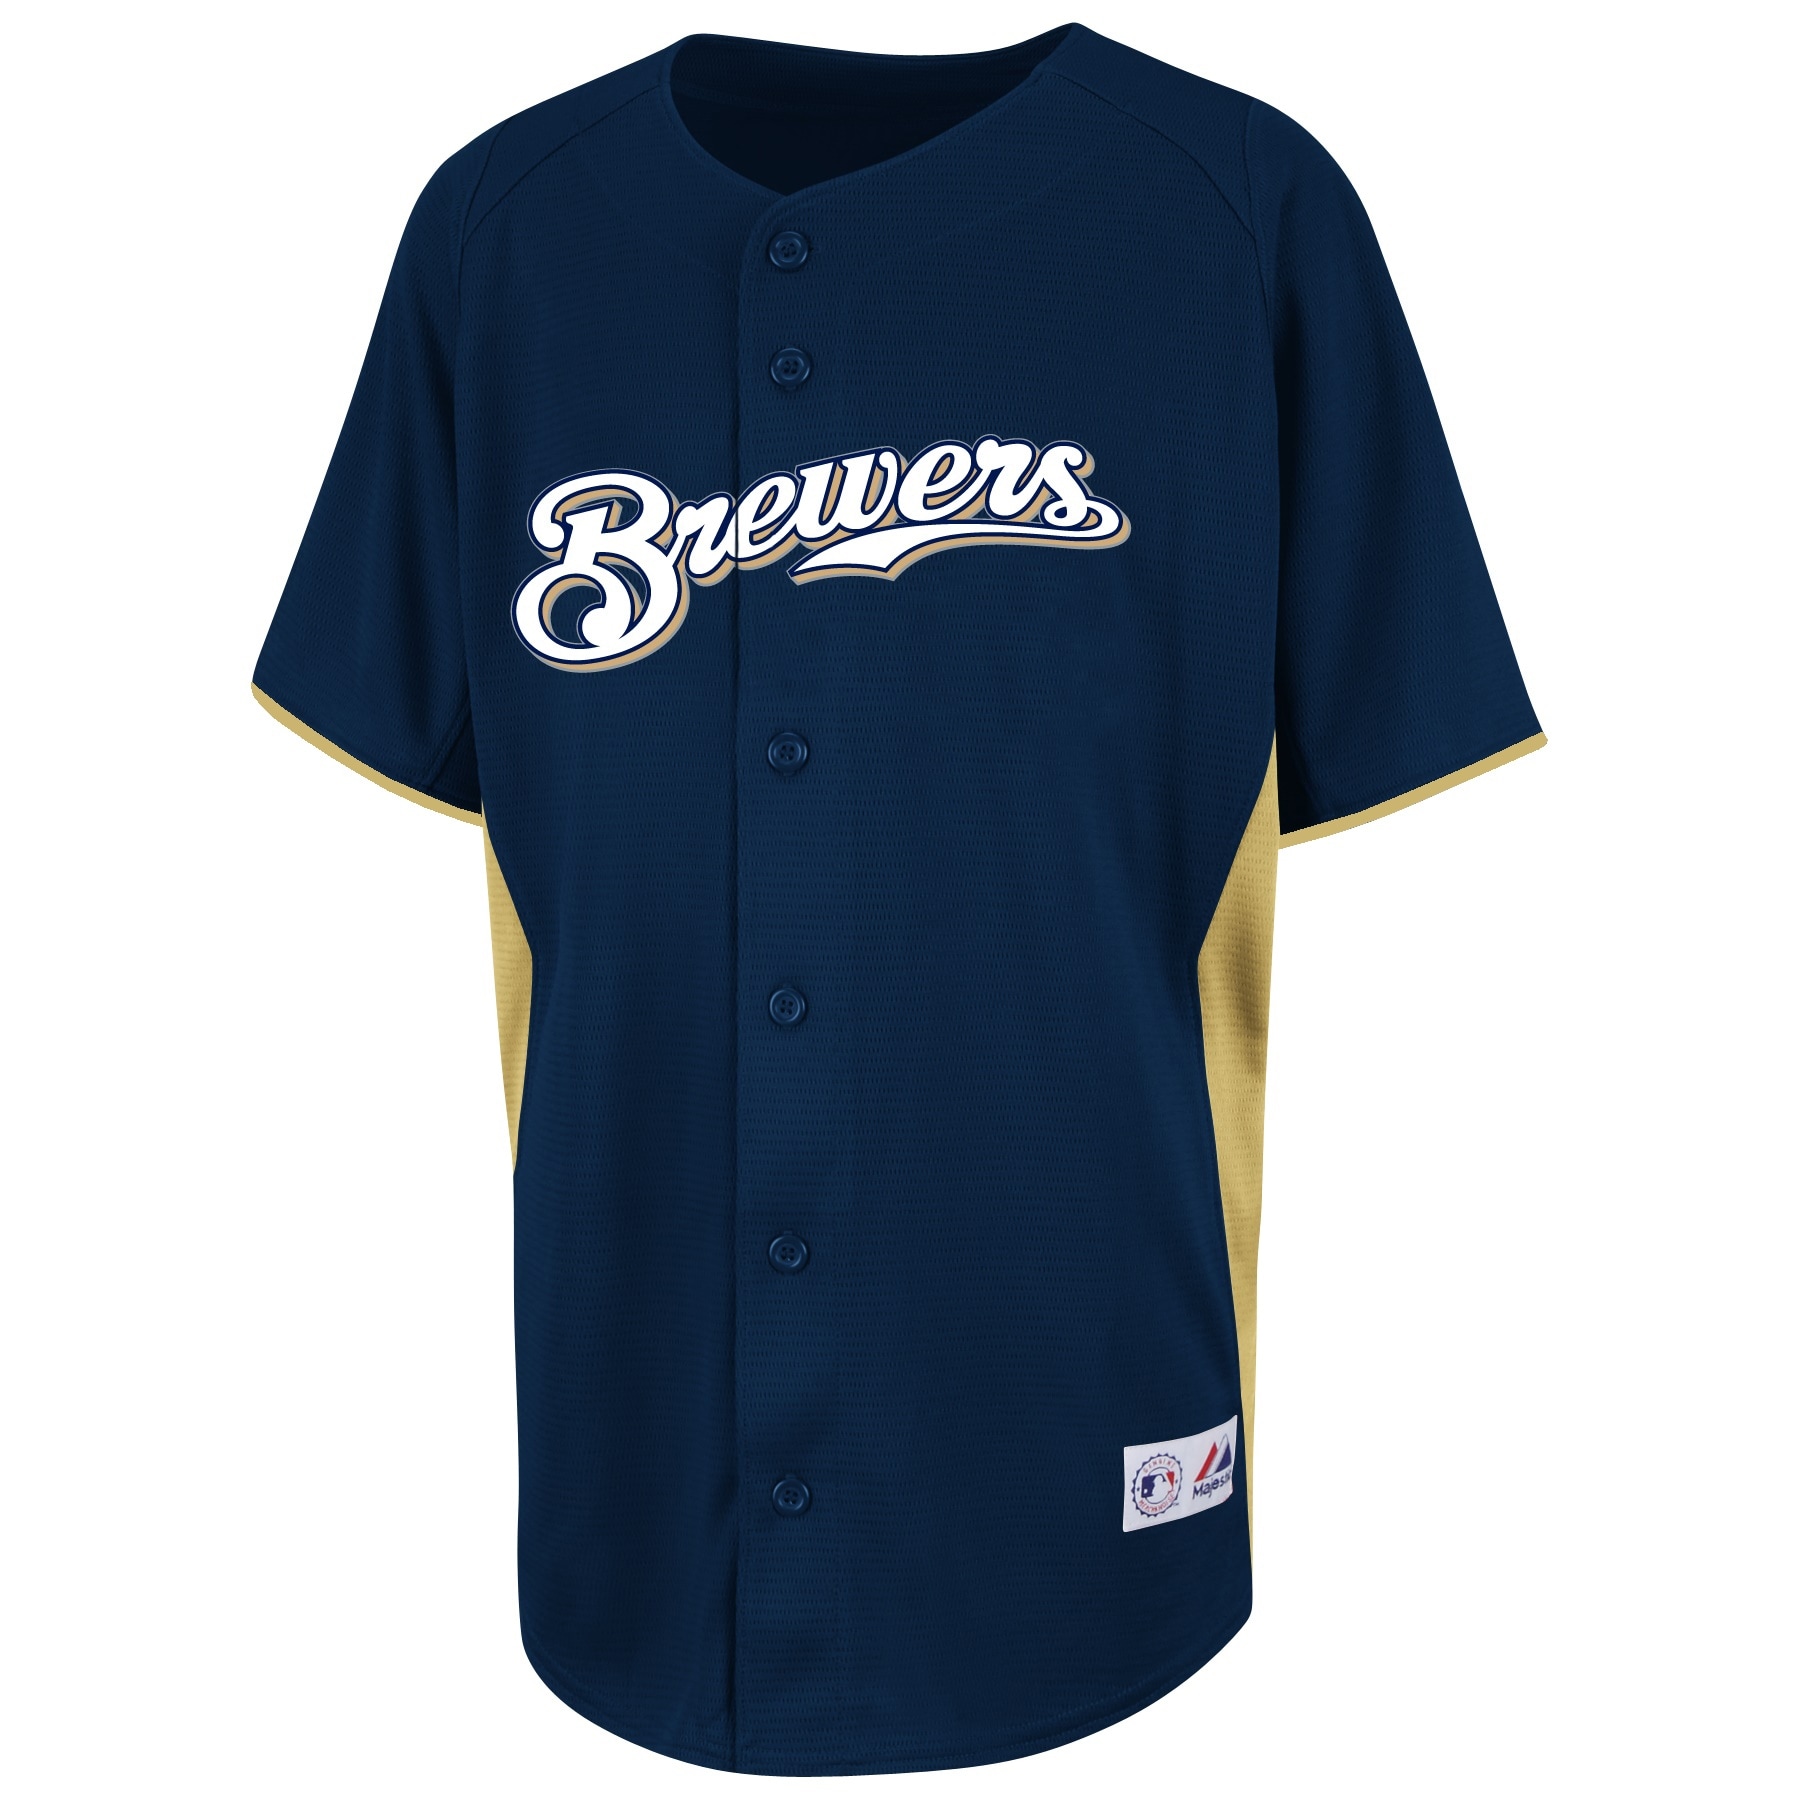 brewers jersey today